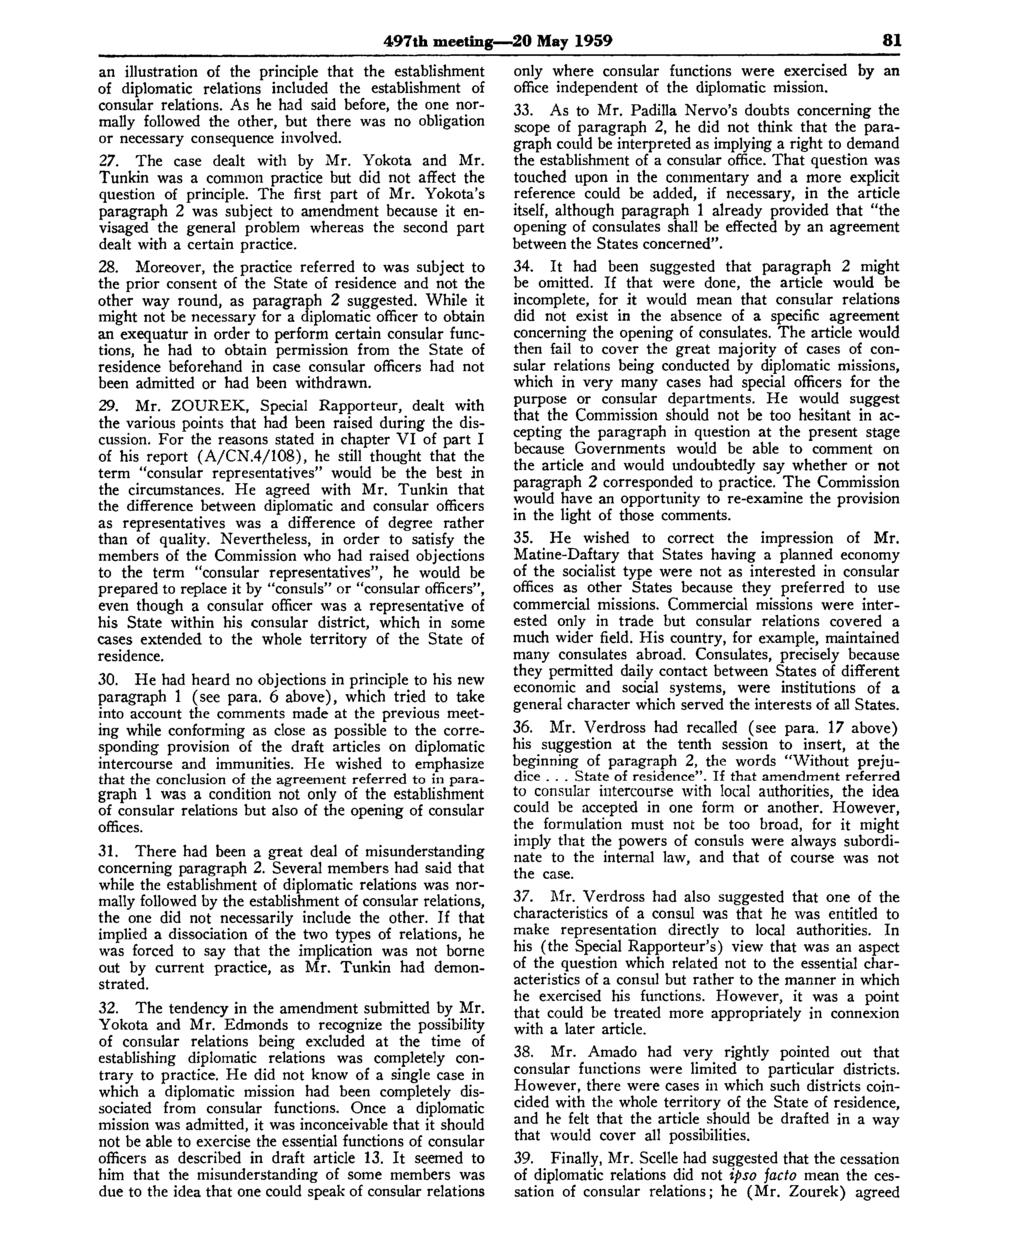 497th meeting 20 May 1959 81 an illustration of the principle that the establishment of diplomatic relations included the establishment of consular relations.